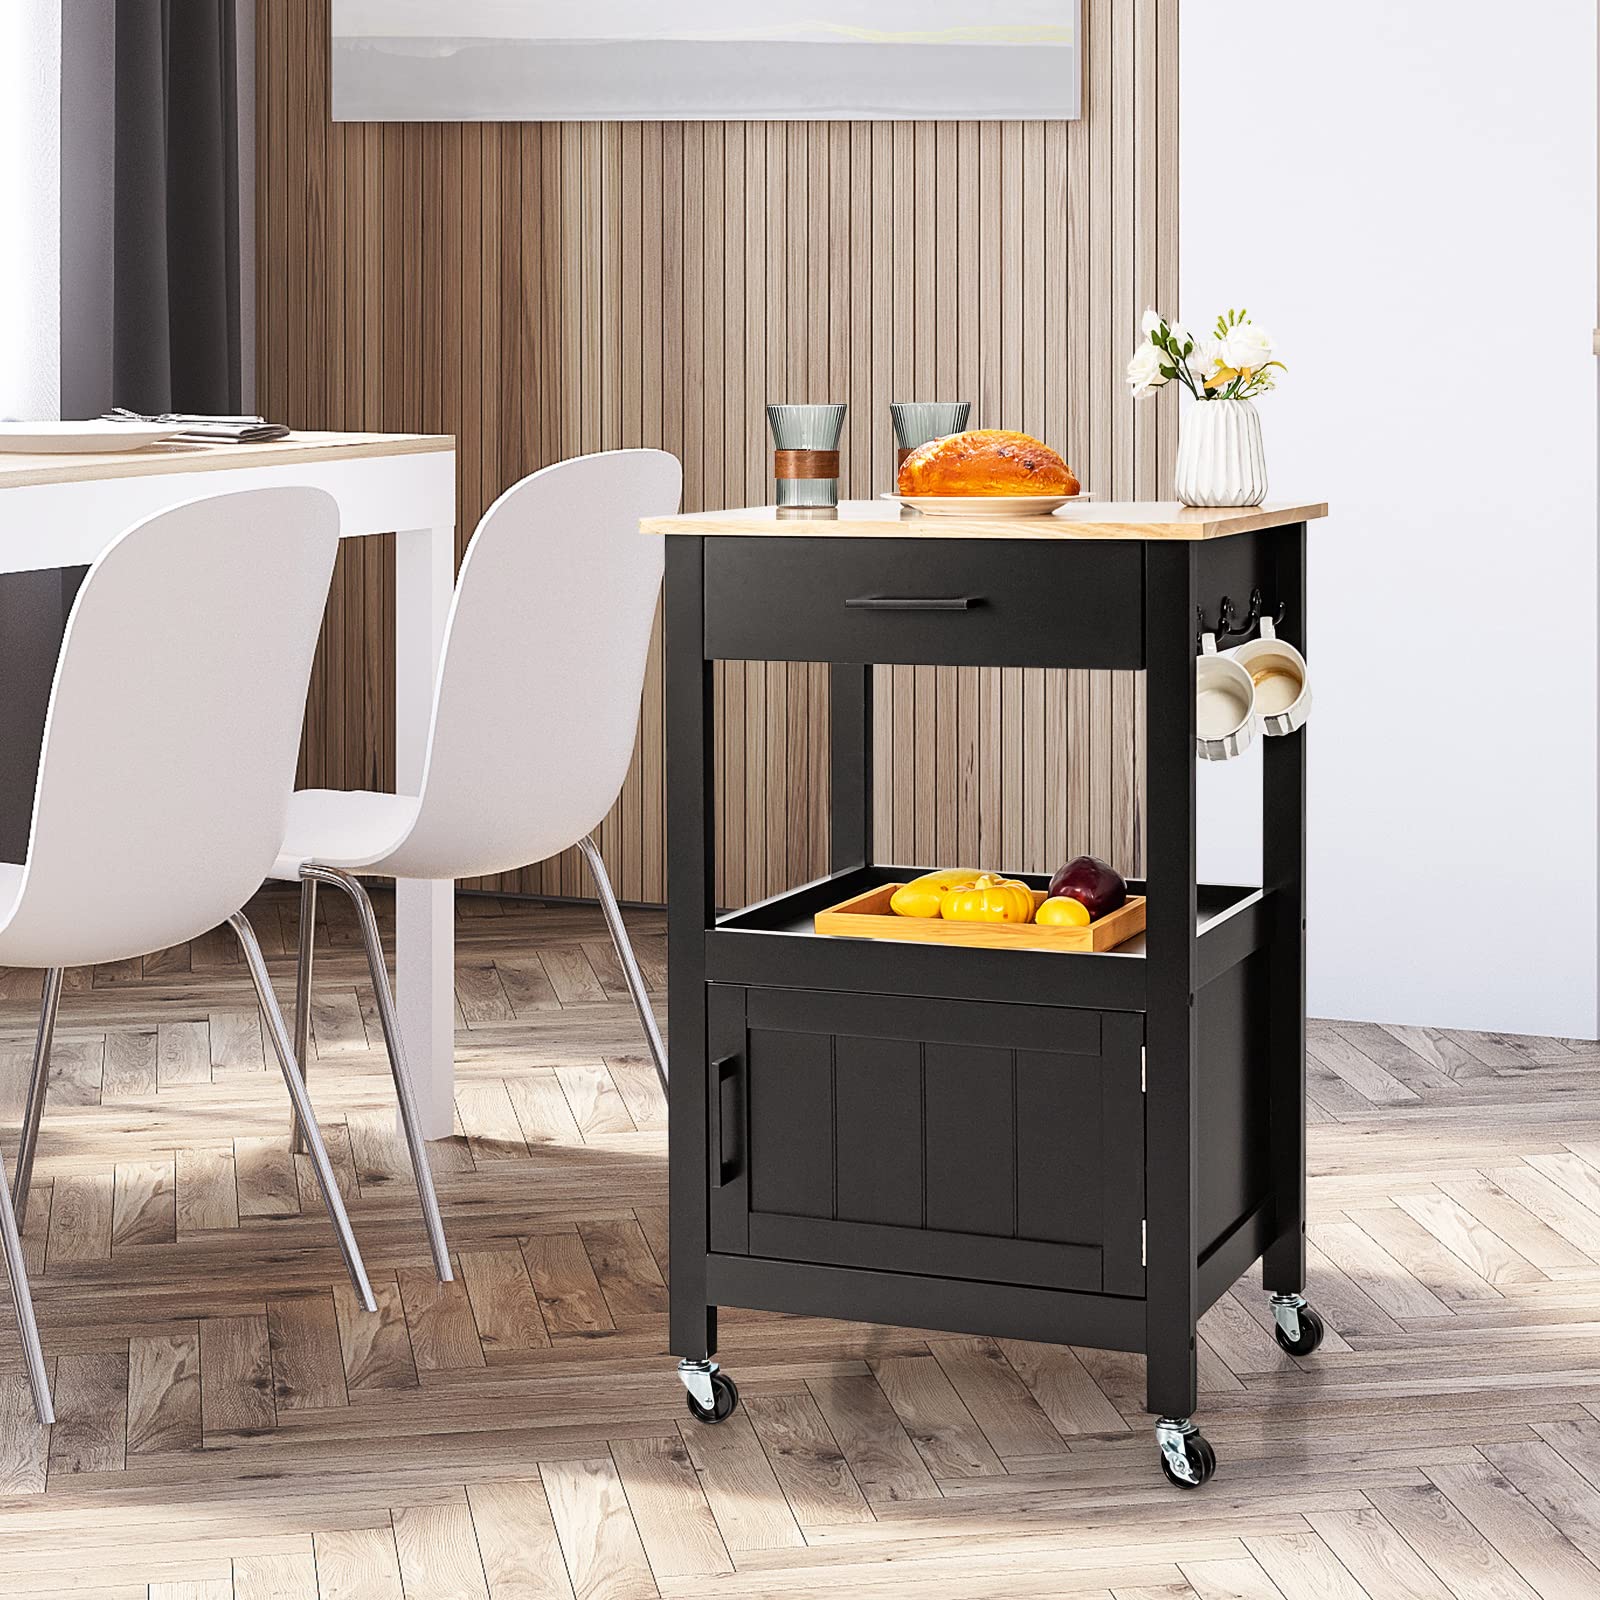 Giantex Kitchen Island with Storage, Small Kitchen Cart on Wheels w/ Drawer, 3 Hooks, Rolling Trolley